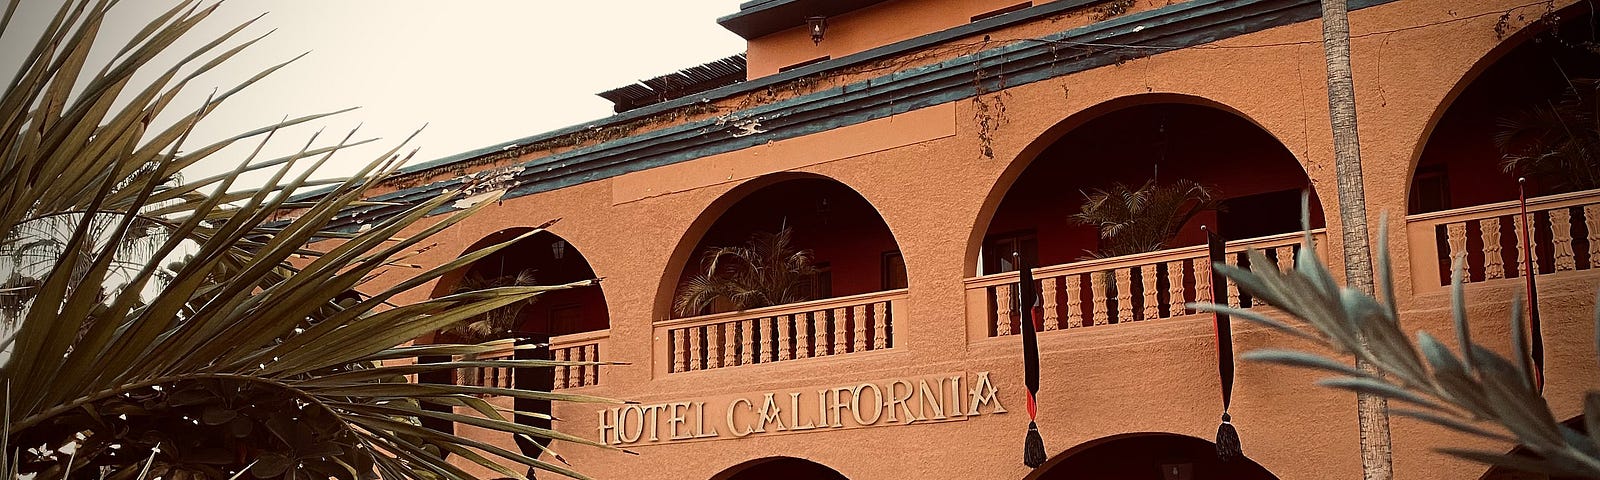 IMAGE: The mythical Hotel California in Todos los Santos, México, which according to The Eagles song, “you can check out any time you like, but you can never leave”